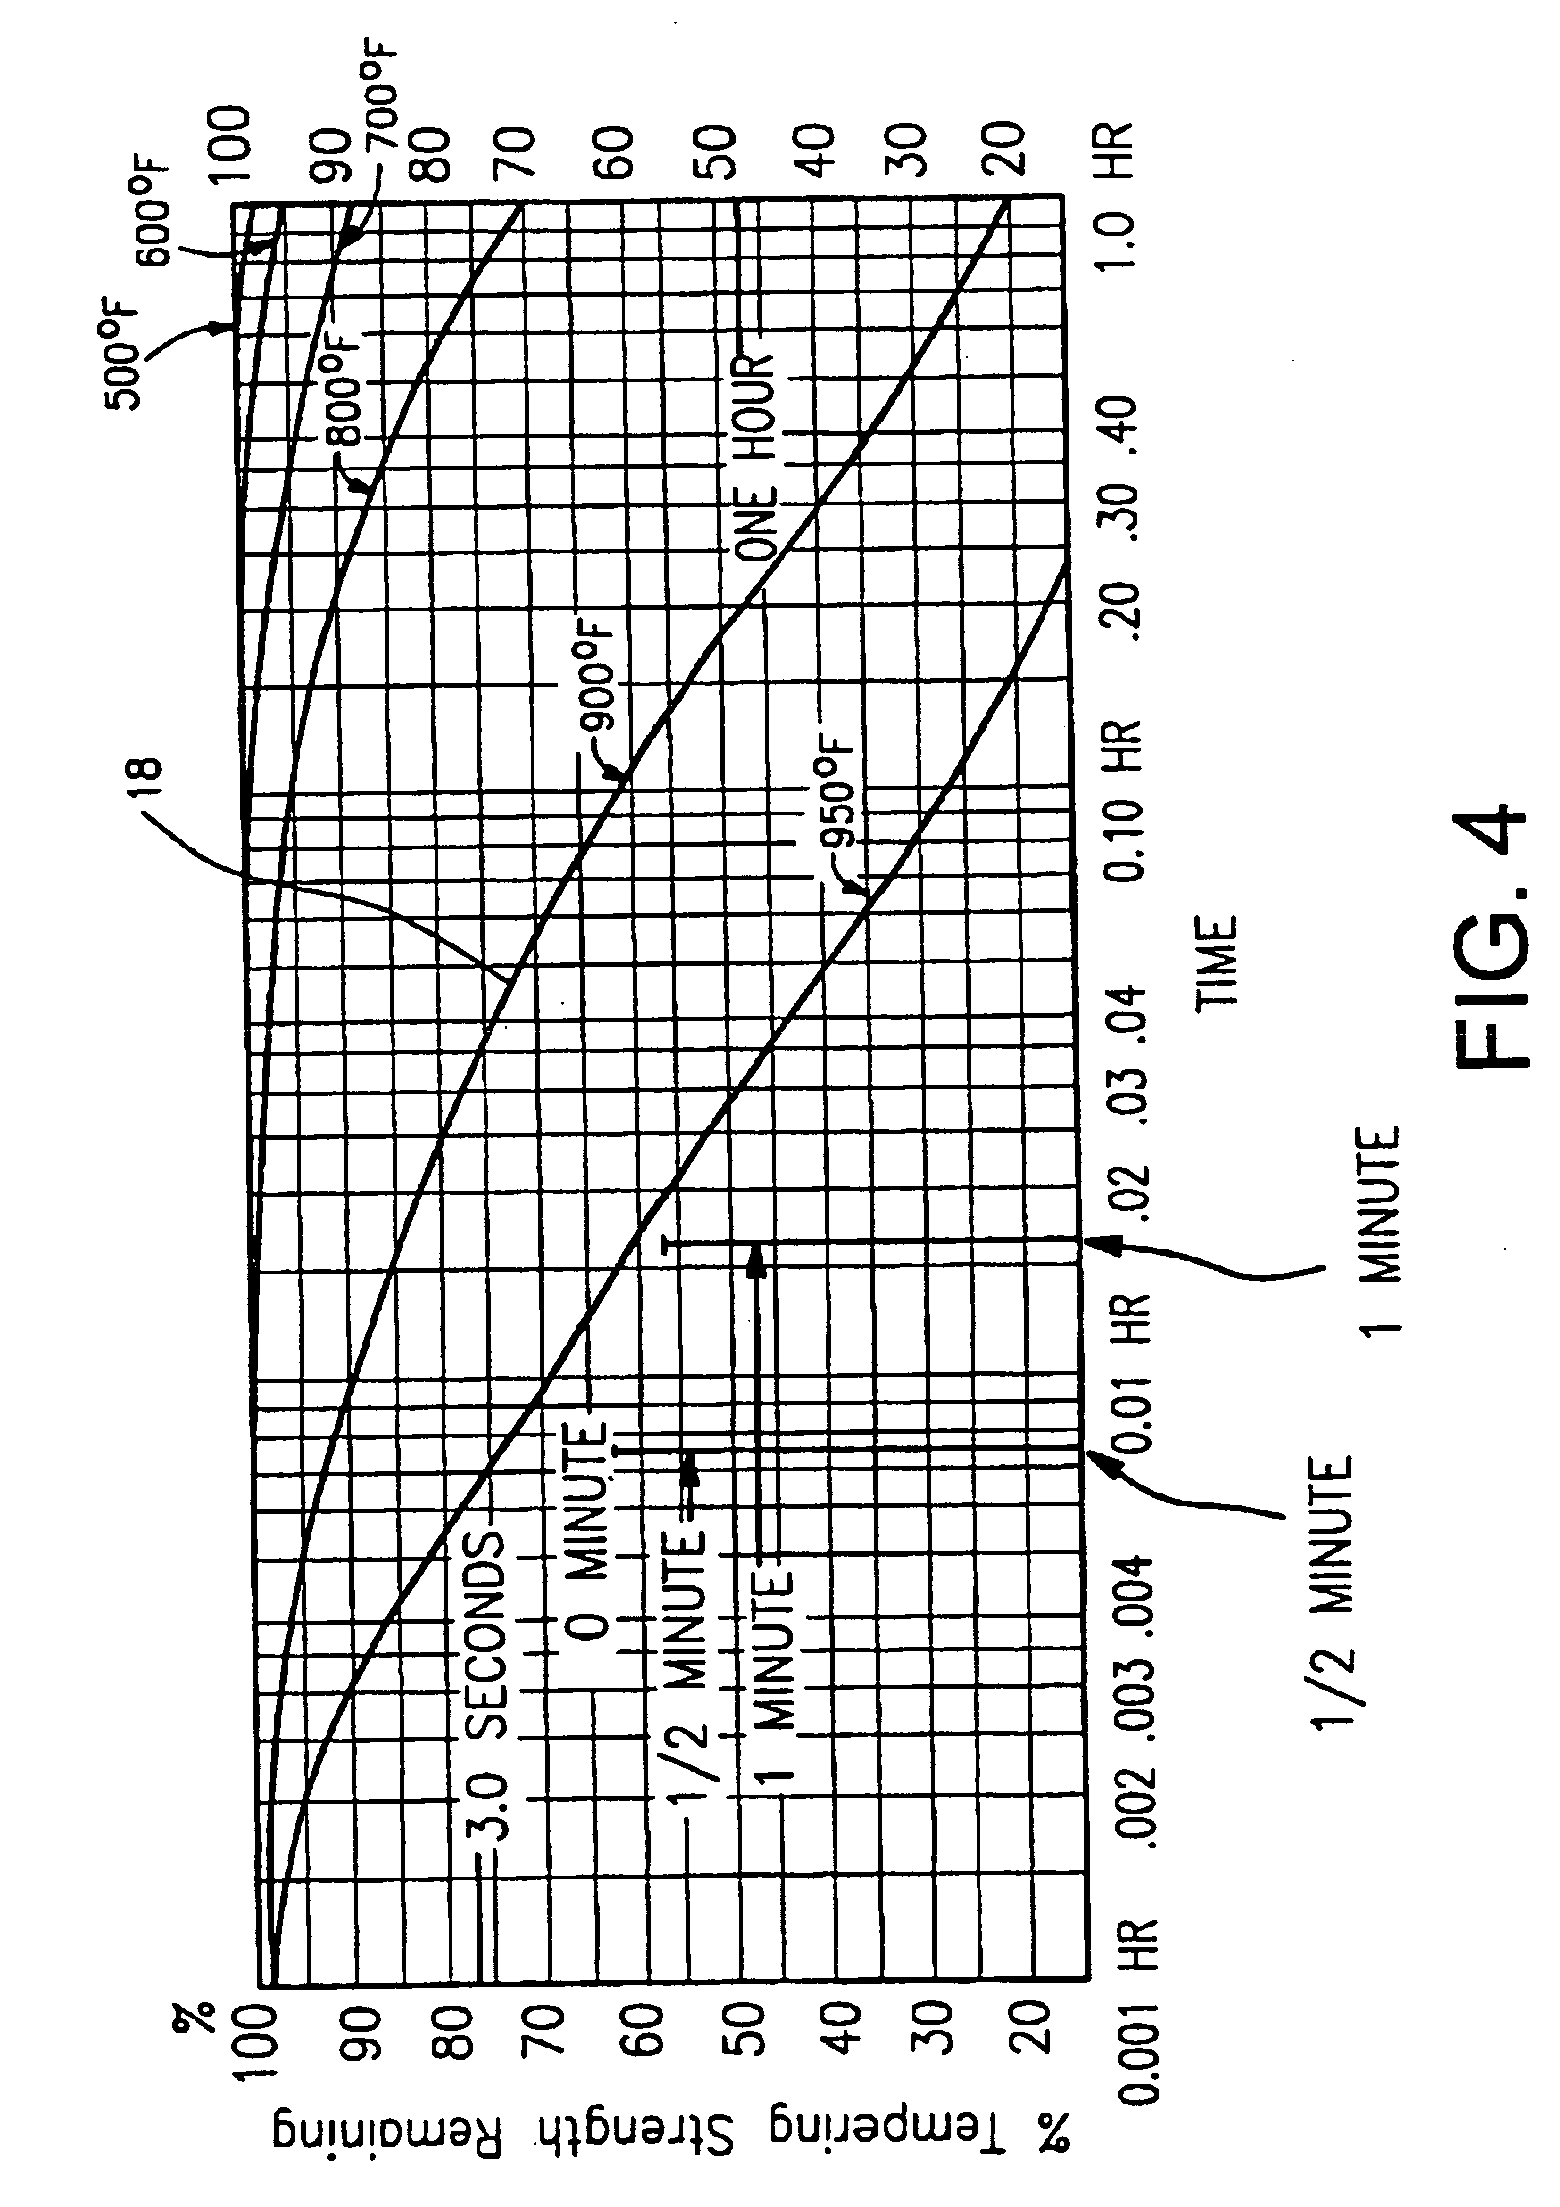 Vacuum insulating glass unit including infrared meltable glass frit, and/or method of making the same